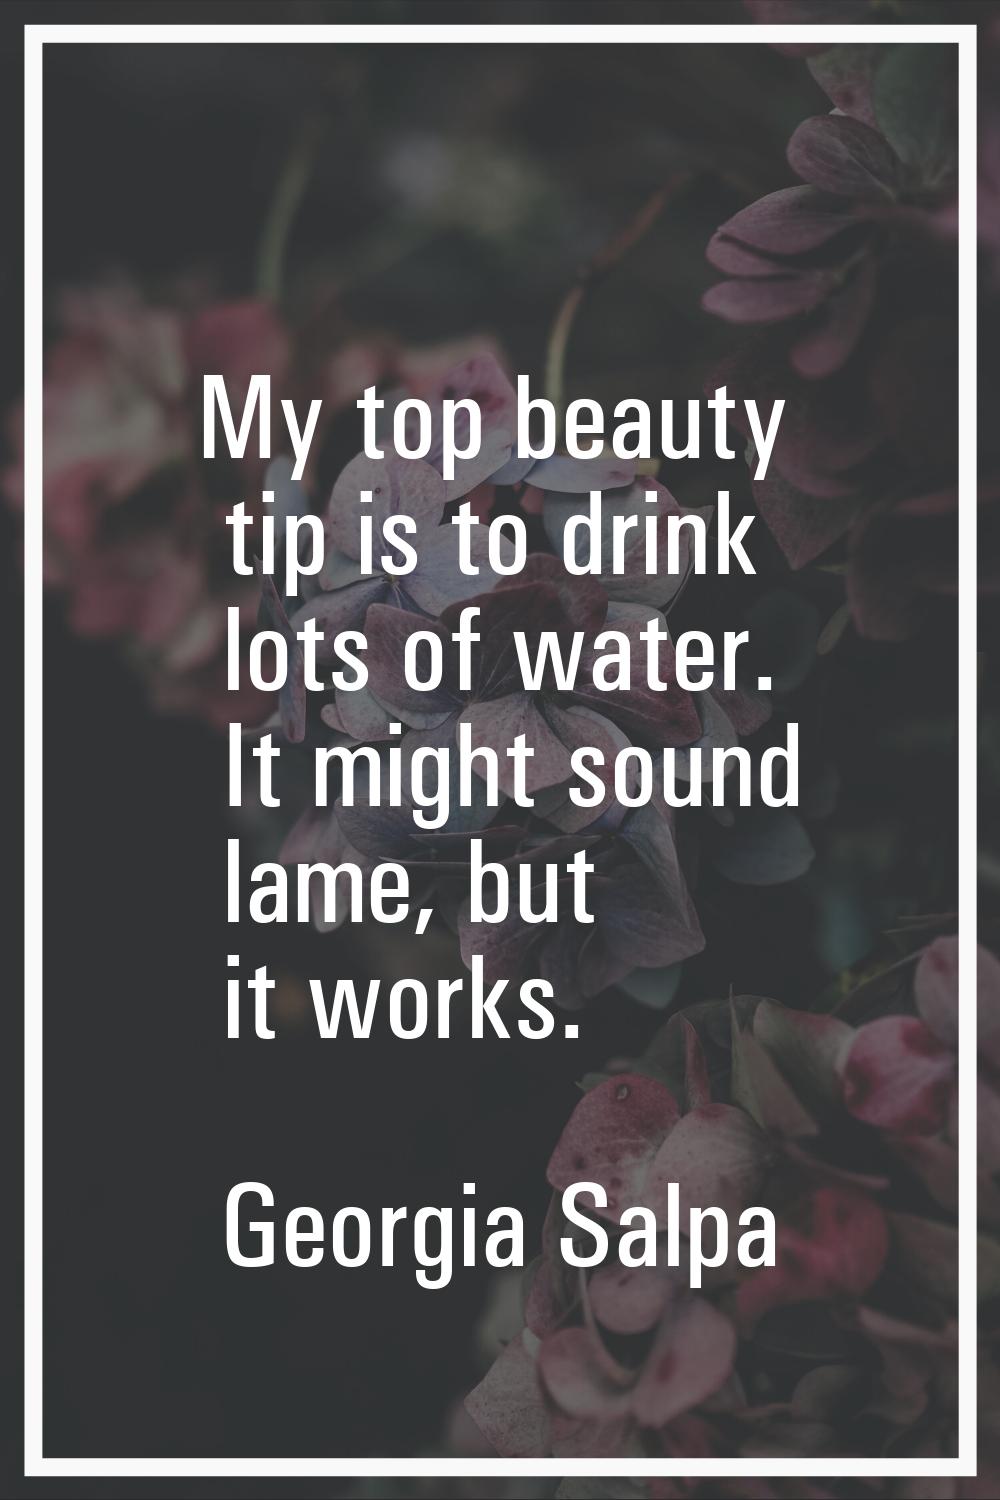 My top beauty tip is to drink lots of water. It might sound lame, but it works.